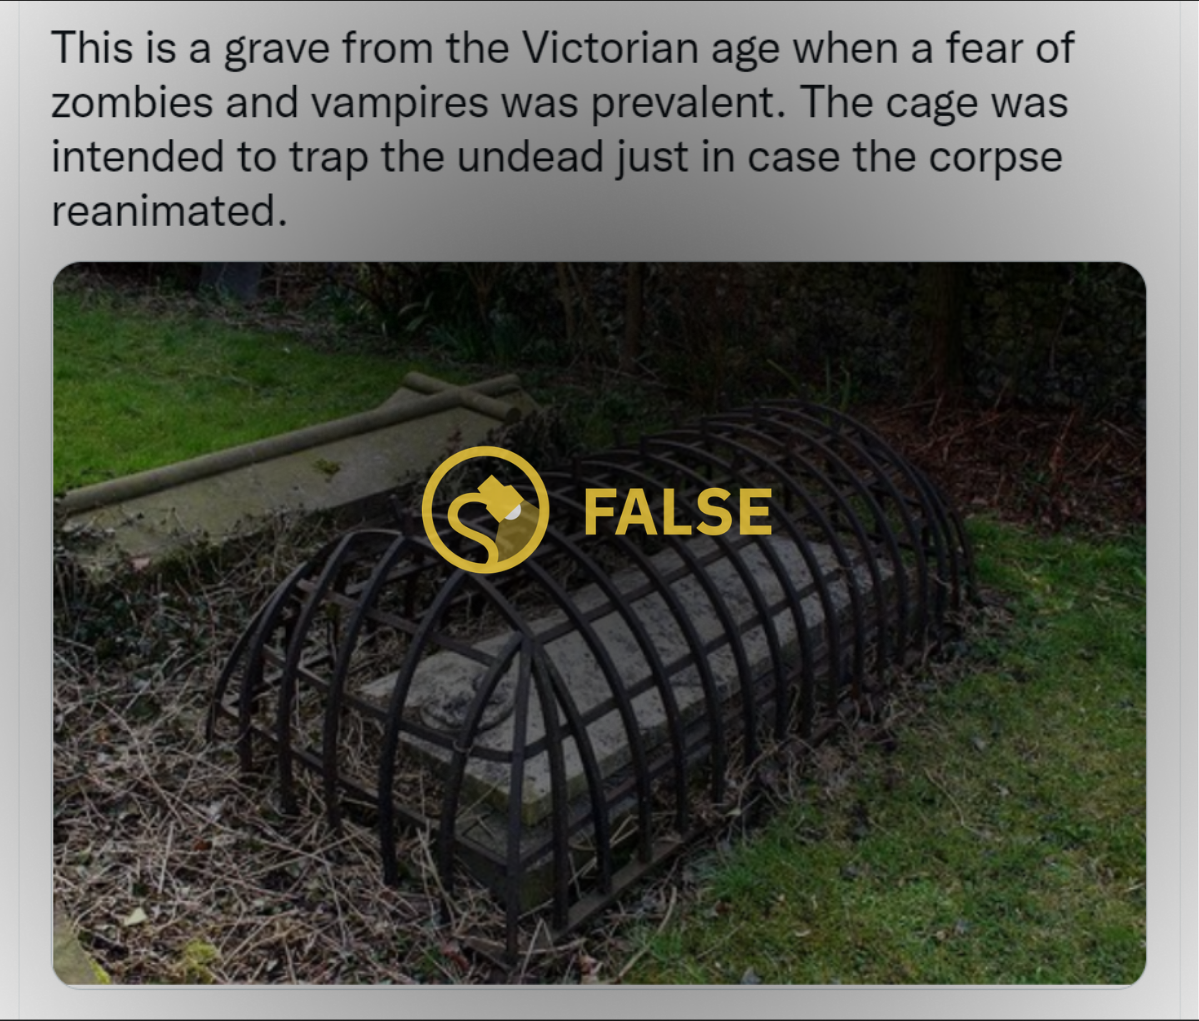 This is a grave from the Victorian age when a fear of zombies and vampires was prevalent. The cage was intended to trap the undead just in case the corpse reanimated.